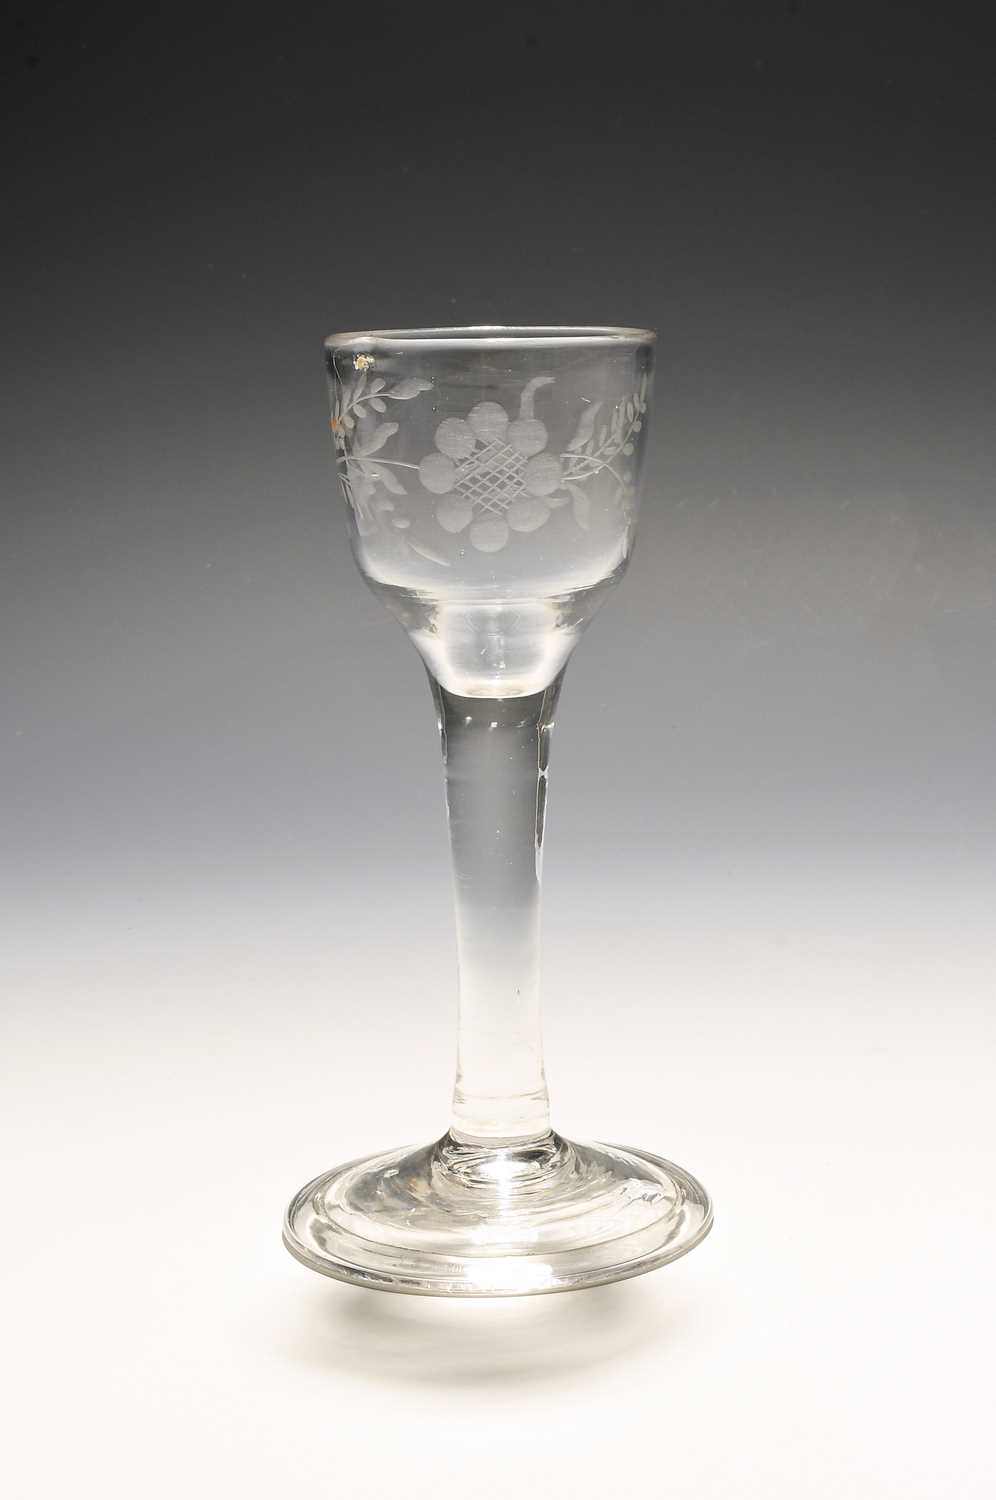 A small wine glass of Jacobite significance, c.1750, the ogee bowl engraved with a sunflower spray